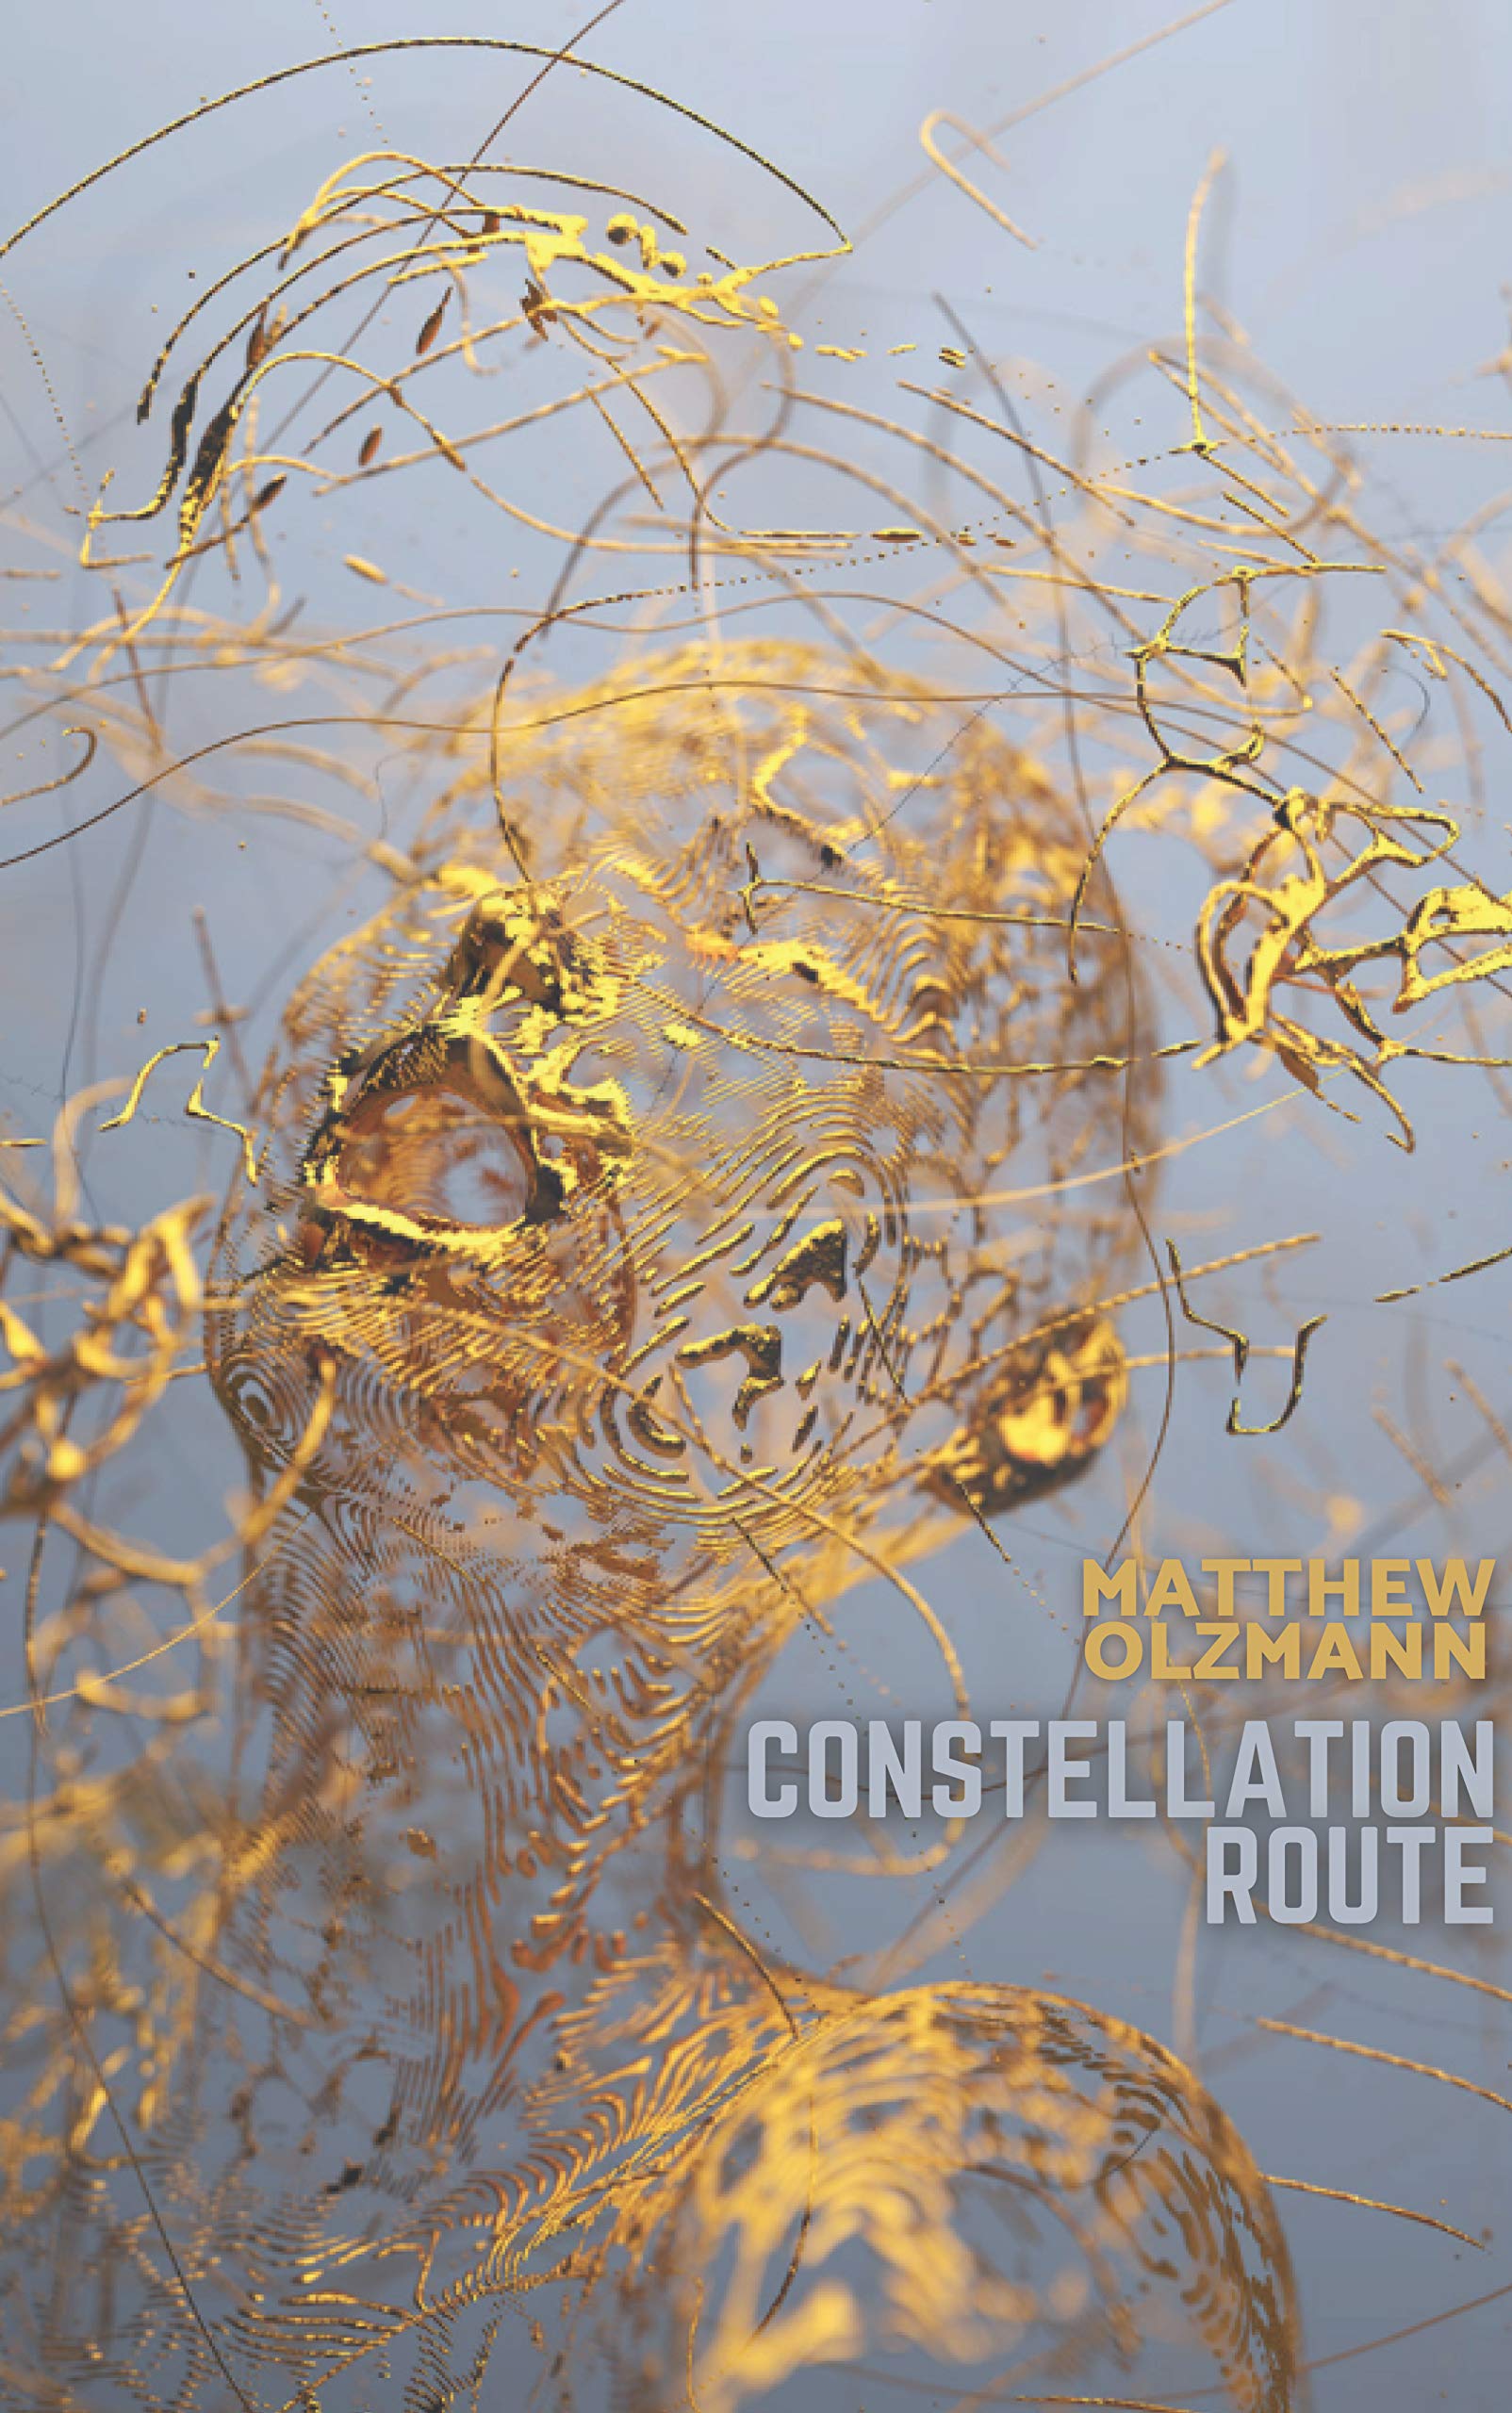 Image for "Constellation Route"